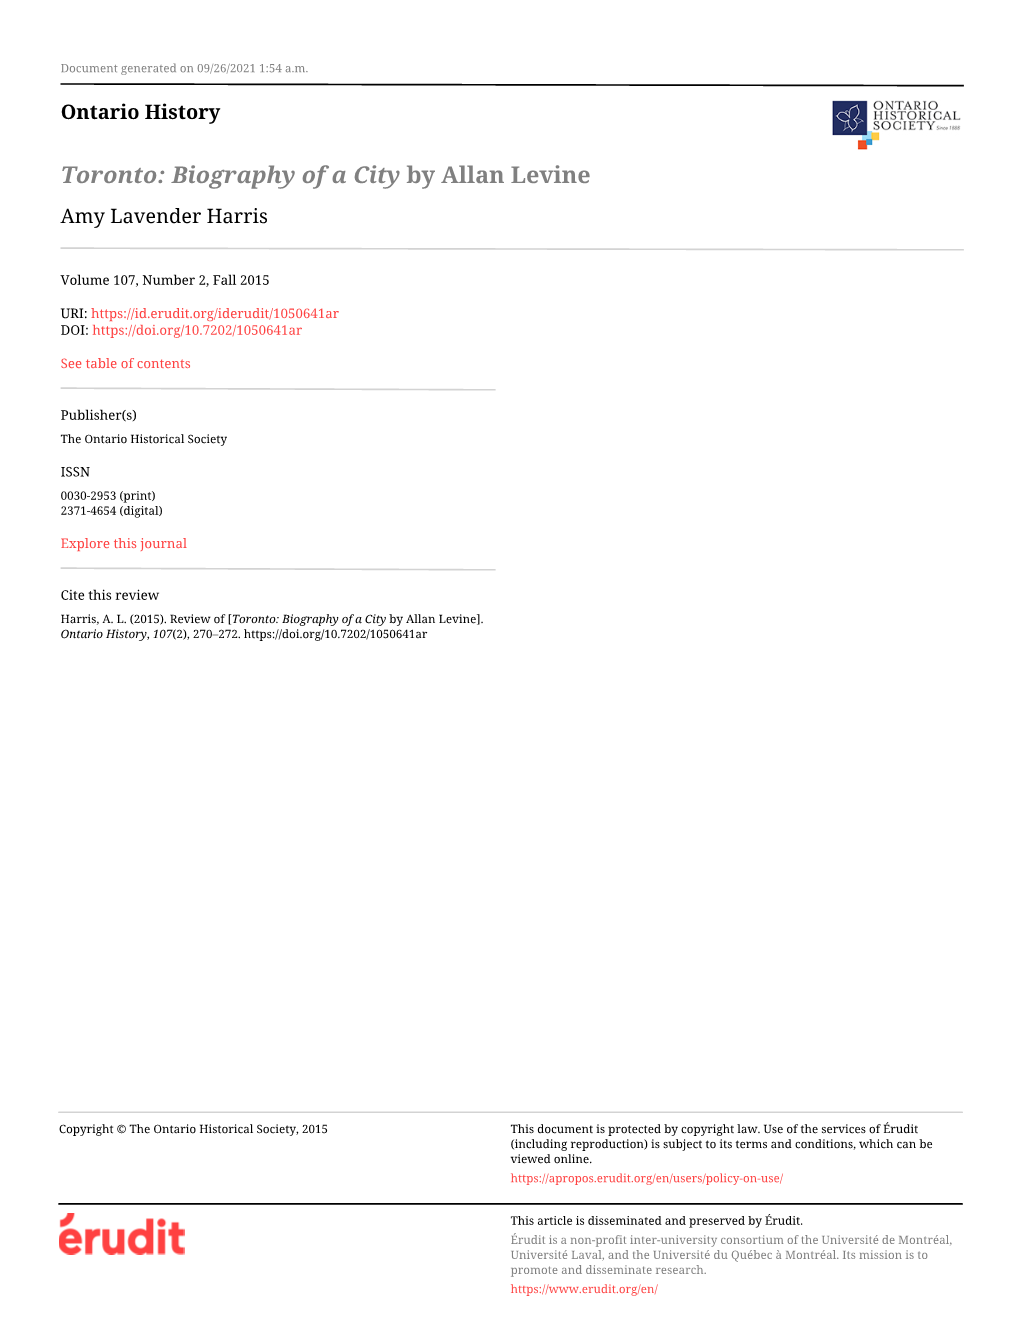 Toronto: Biography of a City by Allan Levine Amy Lavender Harris